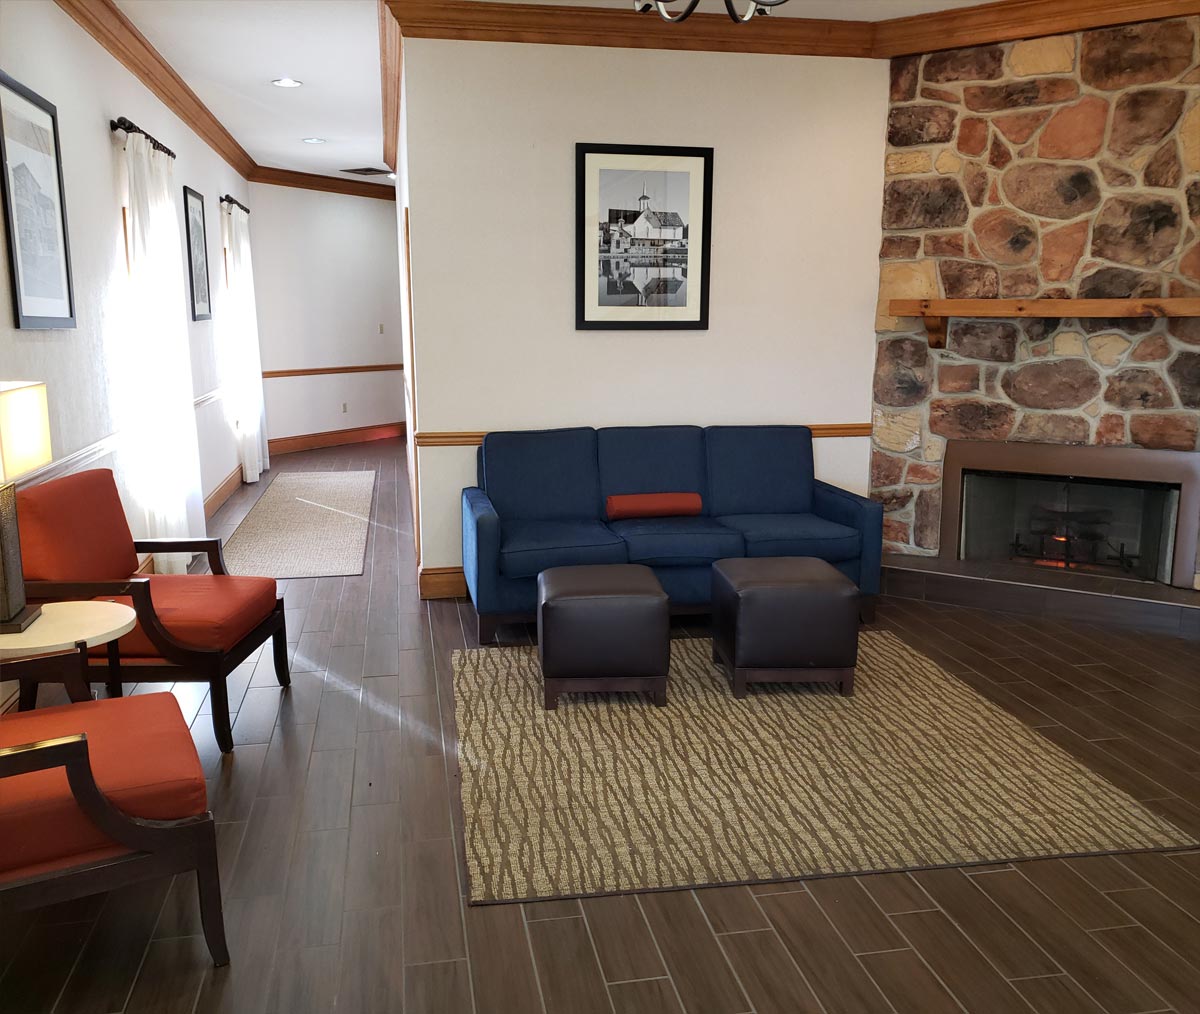 A hotel lobby with fireplace